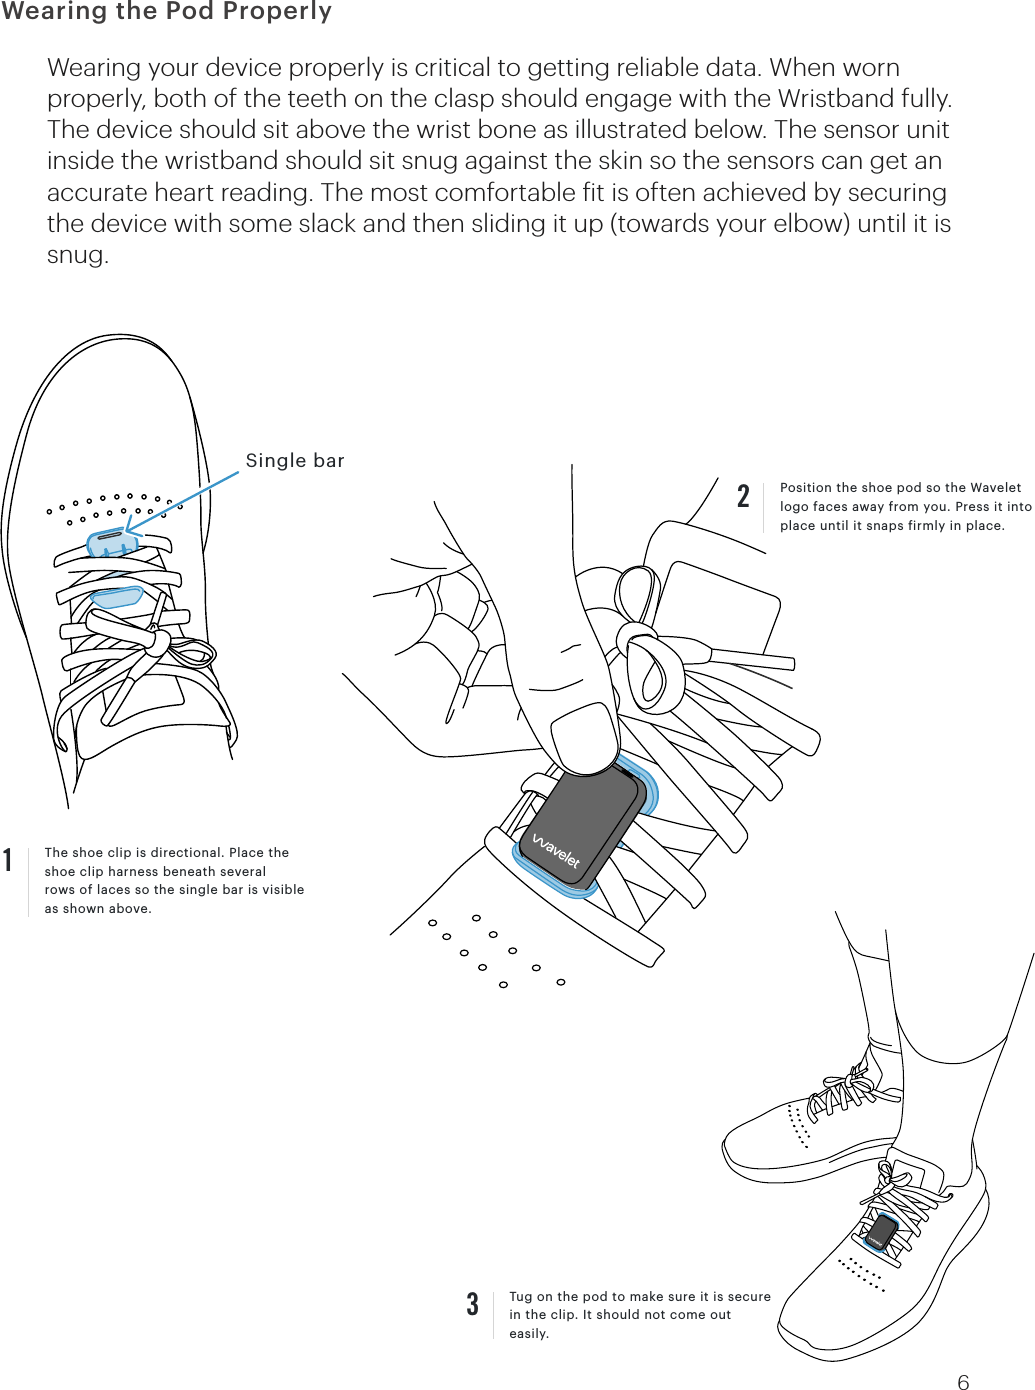 The shoe clip is directional. Place the shoe clip harness beneath severalrows of laces so the single bar is visible as shown above.1Wearing your device properly is critical to getting reliable data. When worn properly, both of the teeth on the clasp should engage with the Wristband fully. The device should sit above the wrist bone as illustrated below. The sensor unit inside the wristband should sit snug against the skin so the sensors can get an accurate heart reading. The most comfortable fit is often achieved by securing the device with some slack and then sliding it up (towards your elbow) until it is snug. Tug on the pod to make sure it is secure in the clip. It should not come out easily.3Single barPosition the shoe pod so the Wavelet logo faces away from you. Press it into place until it snaps firmly in place. 26Wearing the Pod Properly